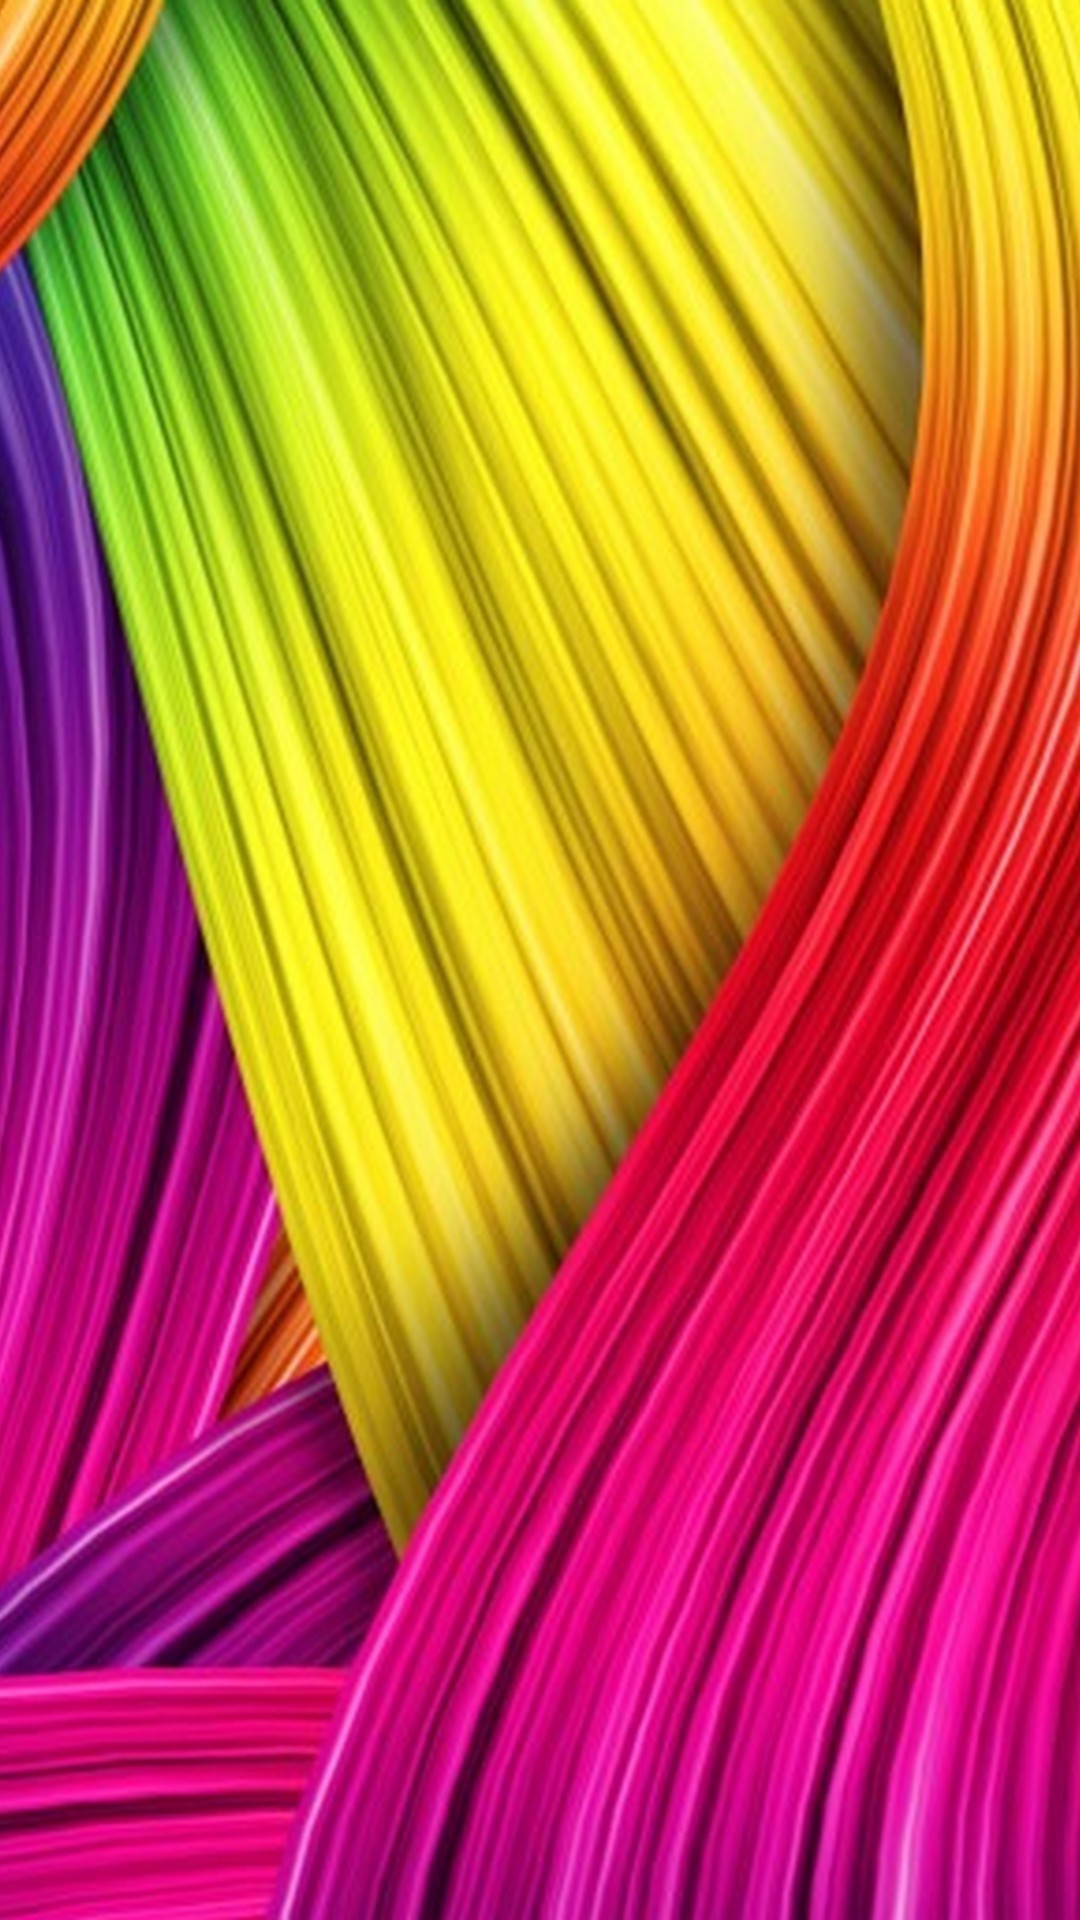 Phones Wallpaper Rainbow Colors With High Resolution - Mobile Phone - HD Wallpaper 